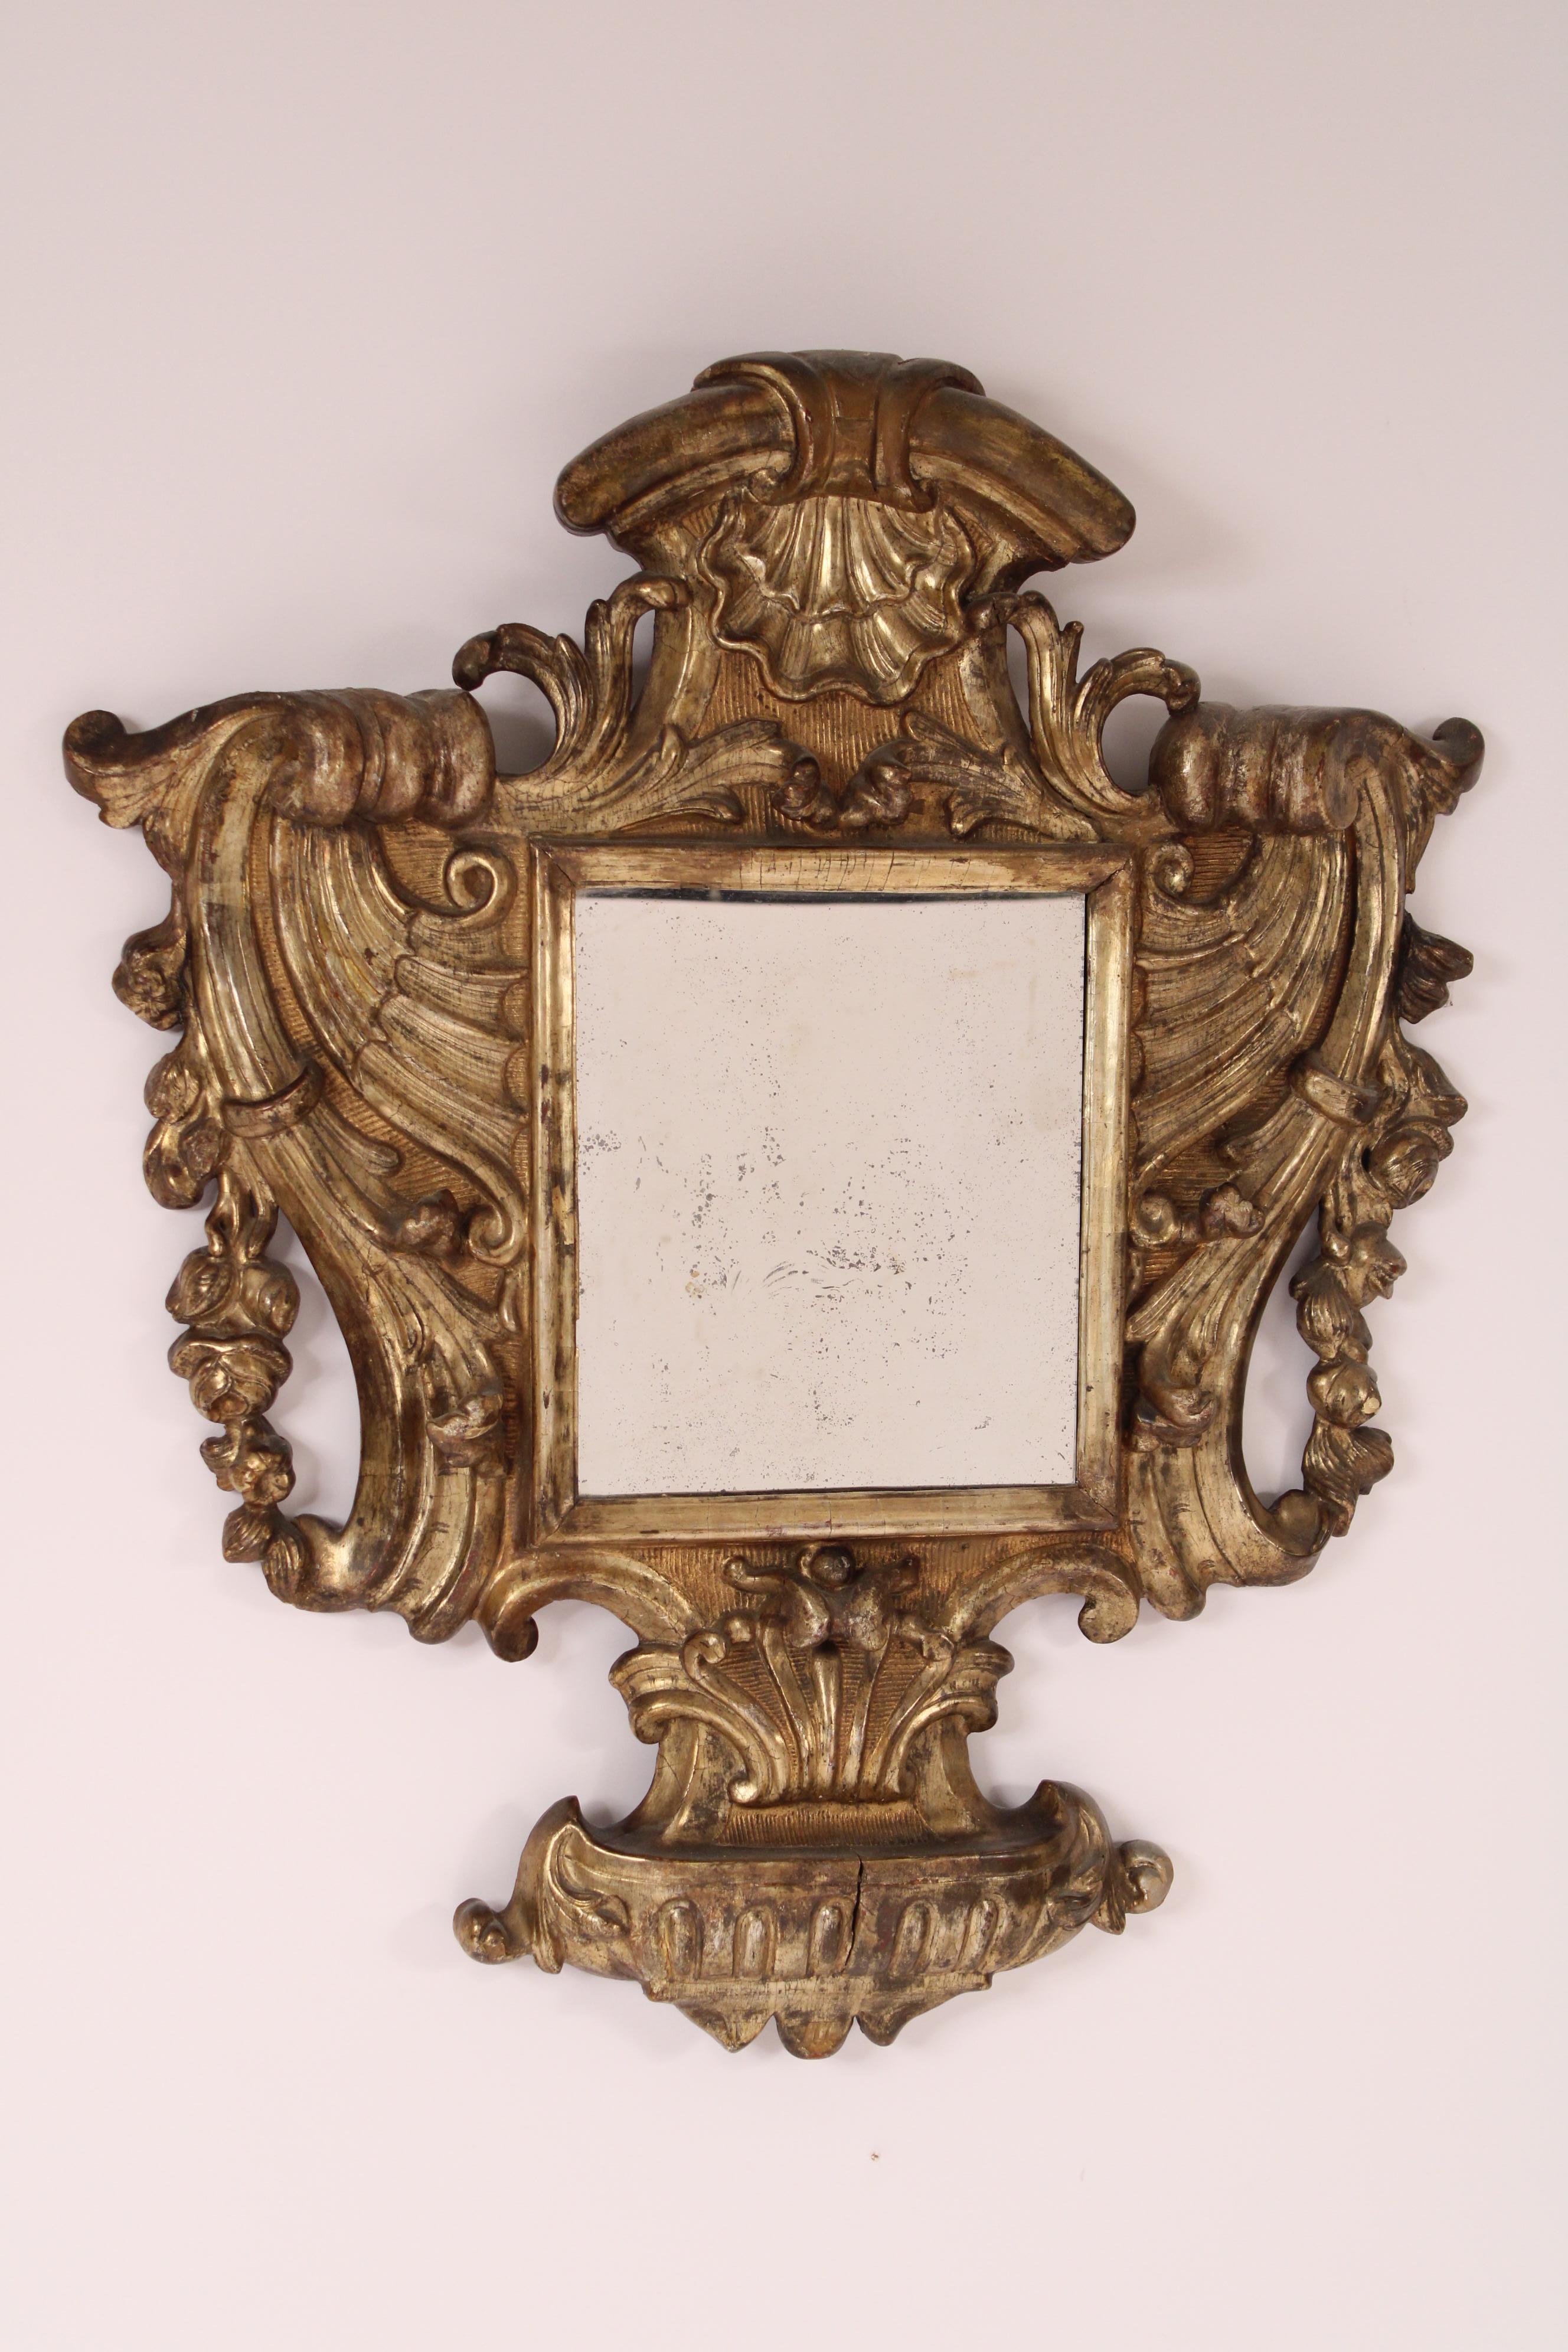 Antique baroque style silver leaf mirror, 19th century. With seashell, floral, gadroon and scroll carvings.